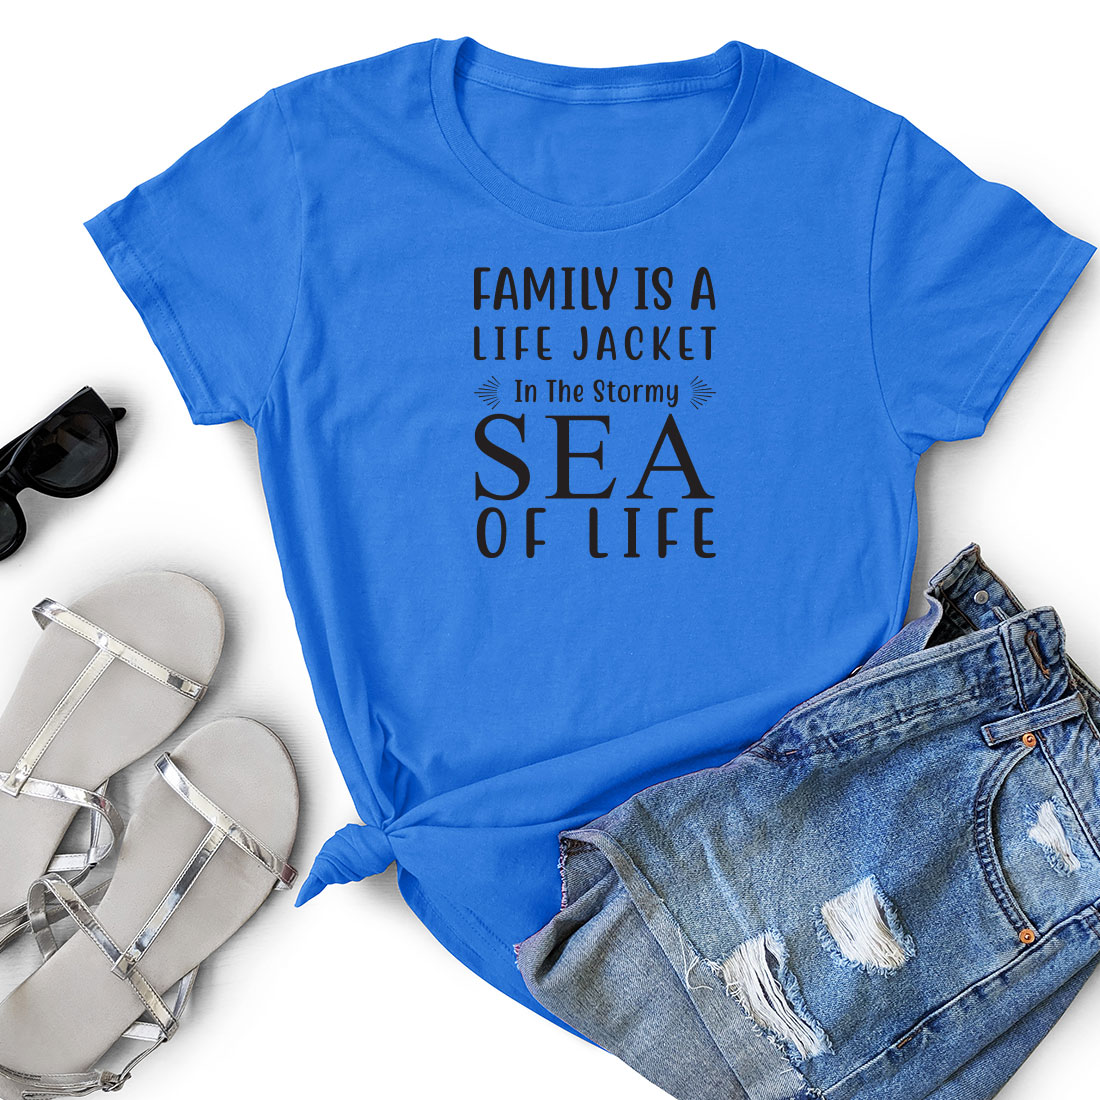 T - shirt that says family is a life jacket in the story of sea.